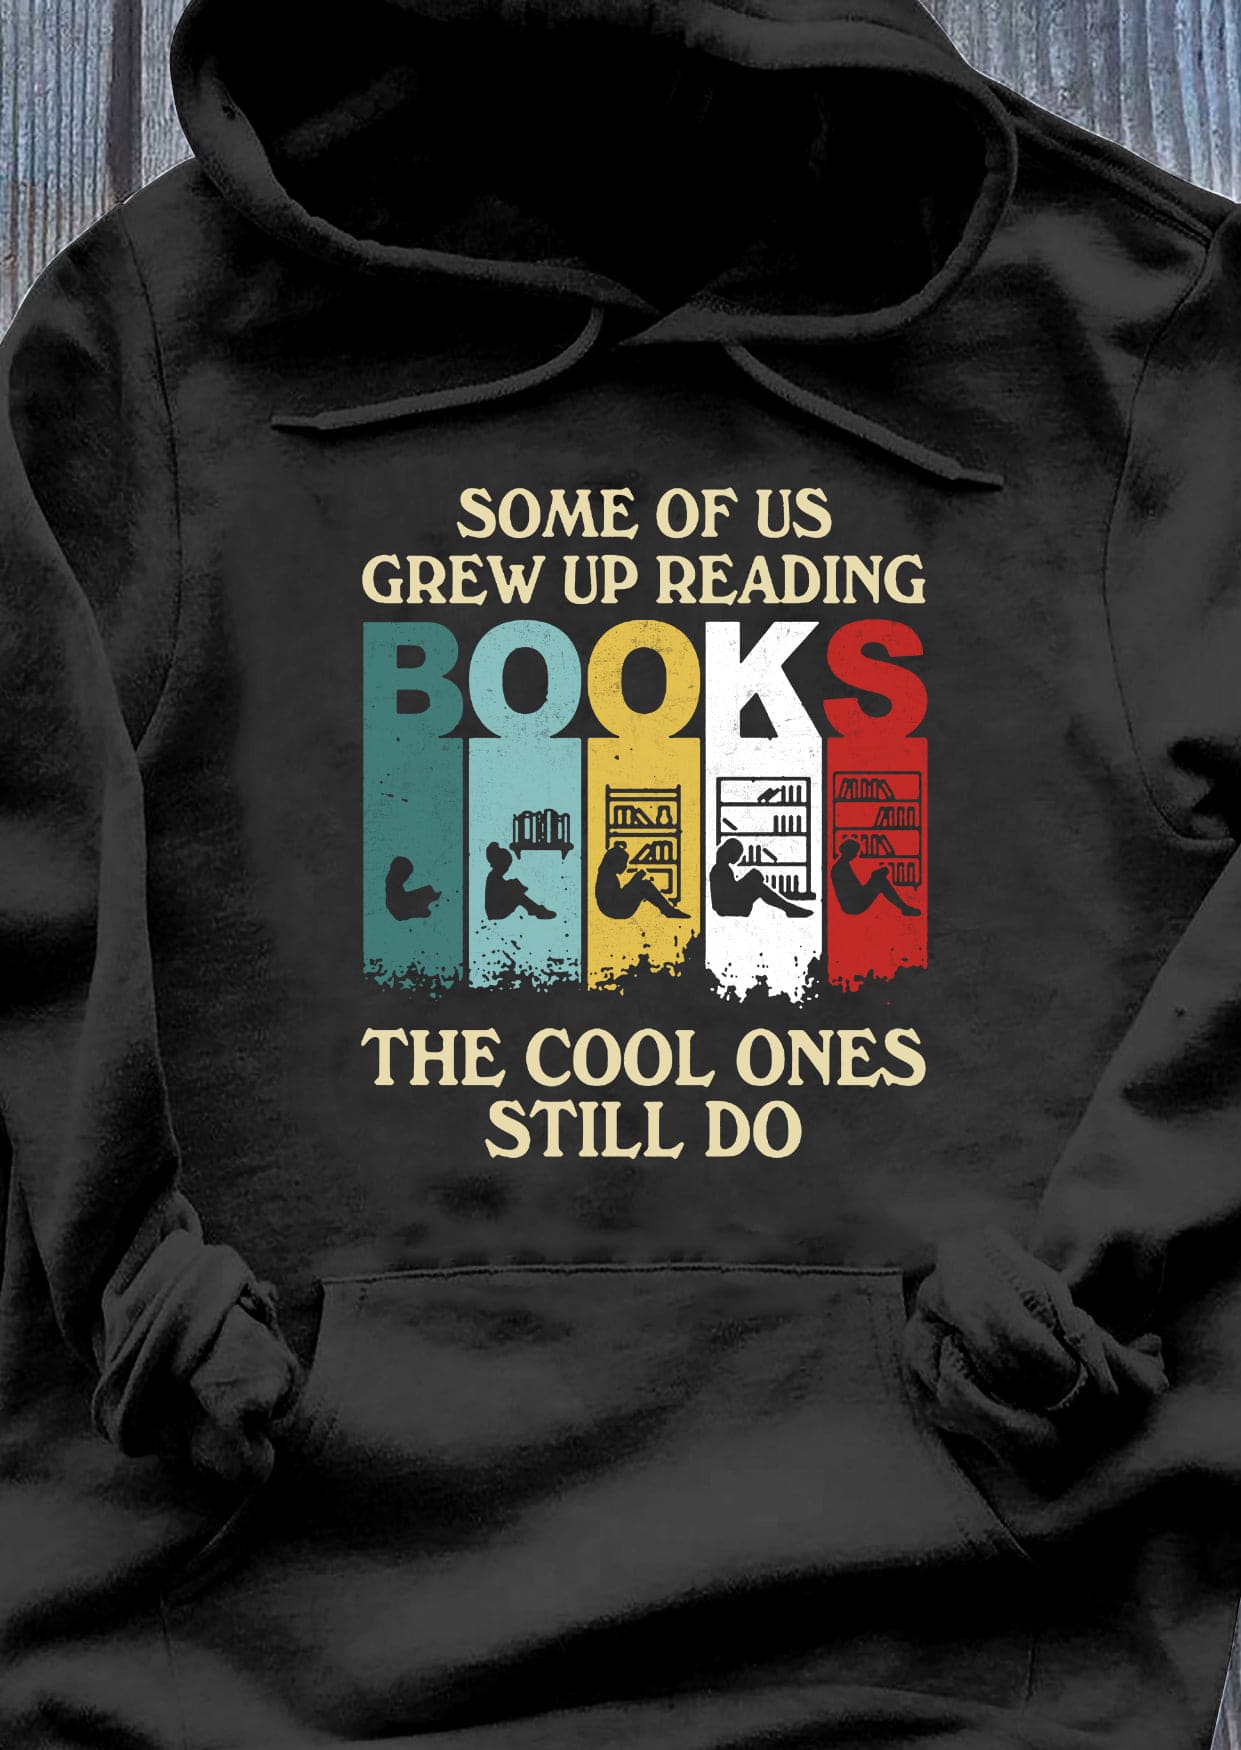 Some of us grew up reading books, the cool ones still do - Cool book reader